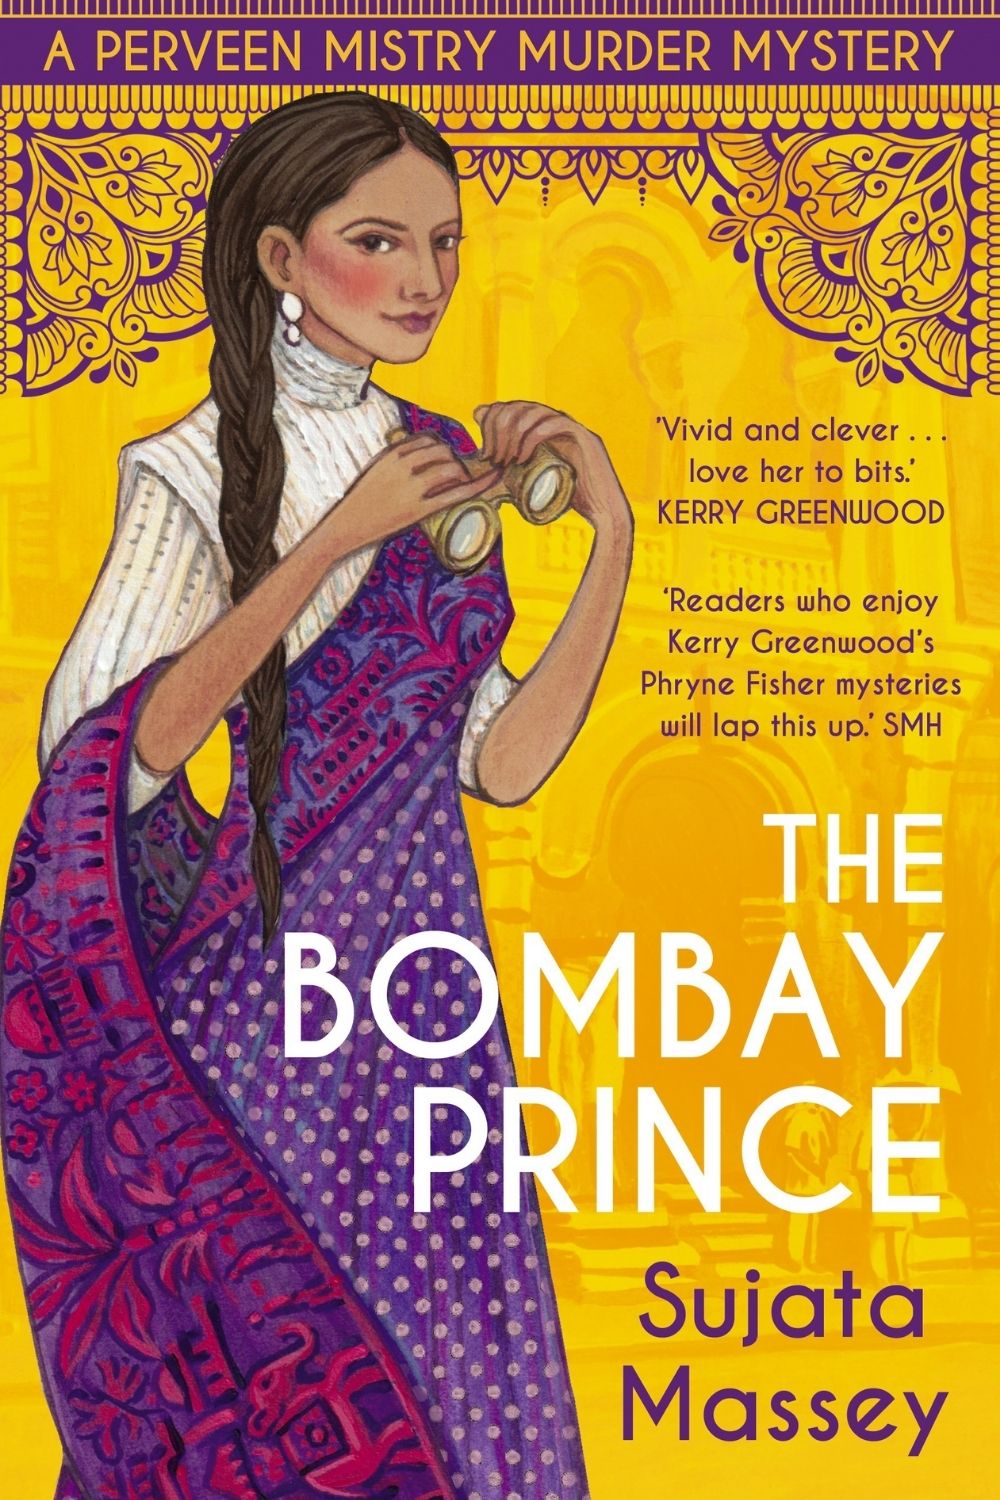 Top 10 Books By Indian Authors In June 2021 (The Bombay Prince by Sujata Massey)